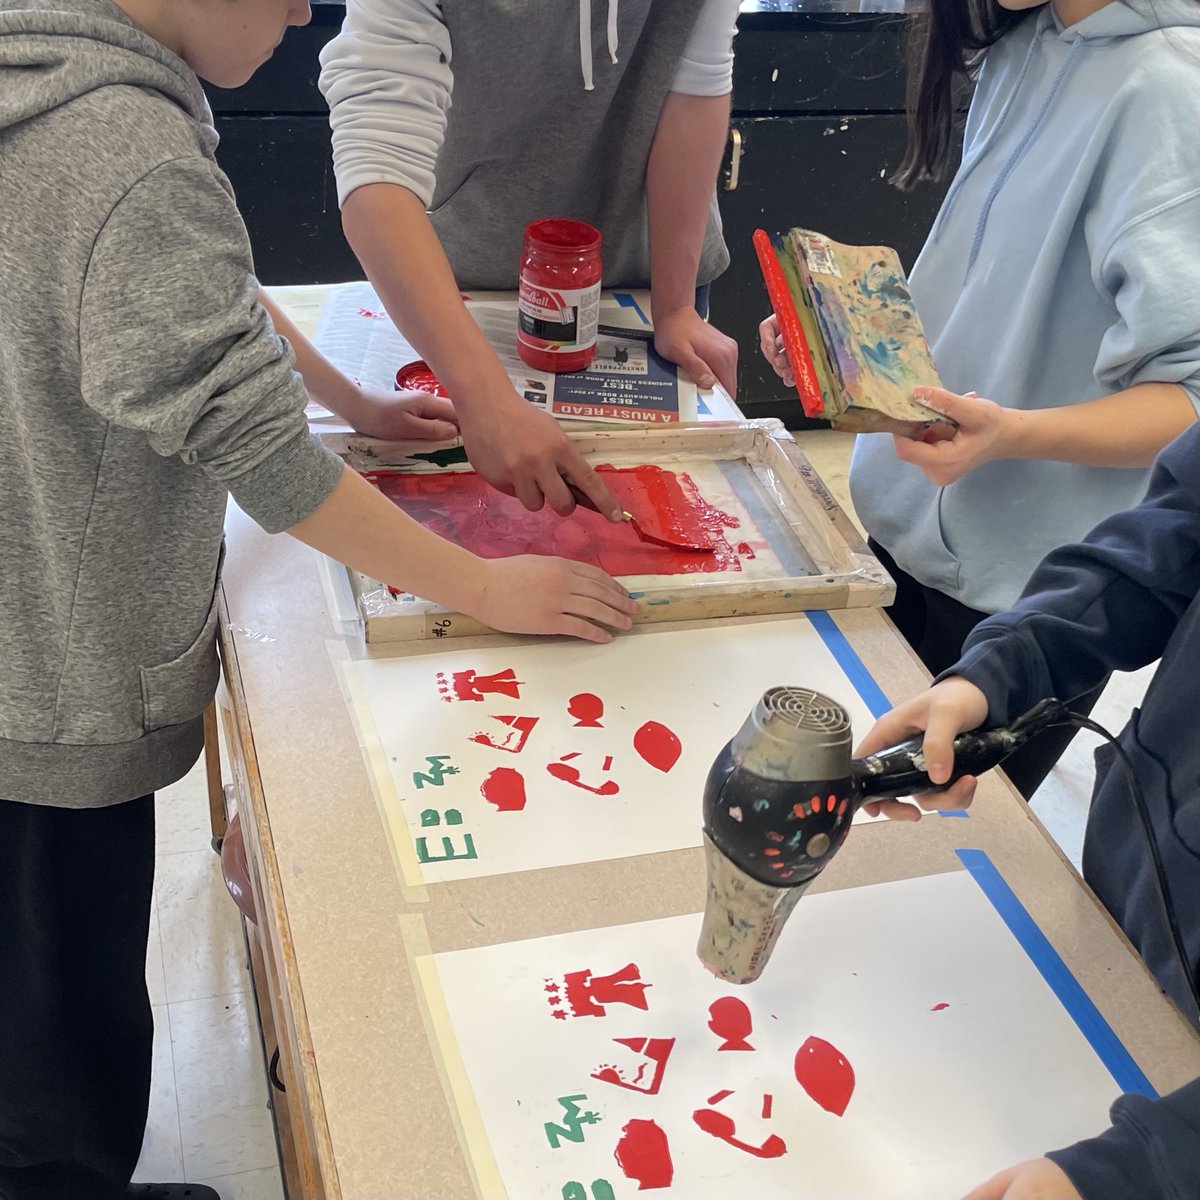 Learning how screen printing quickly creates multiple editions of an artwork.  Students individually design a symbol to represent themselves and collaboratively create a classroom print to remember each other.

A tactile exercise in teamwork!

#D90Learns #D90Art